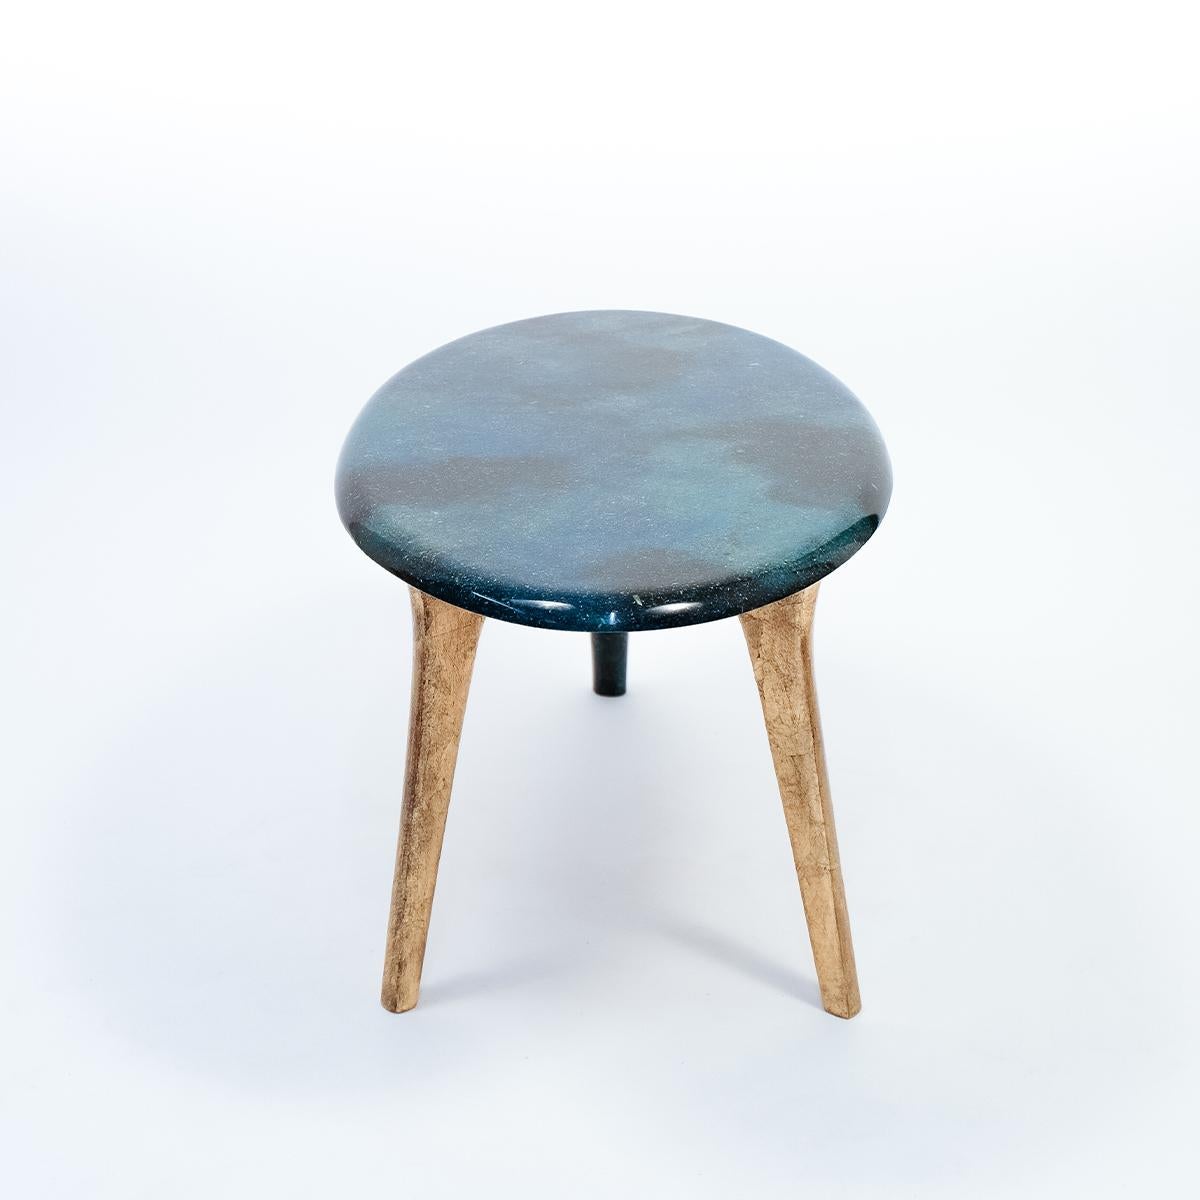 Noste Bench Wood and Pigment Resin (Moderne)